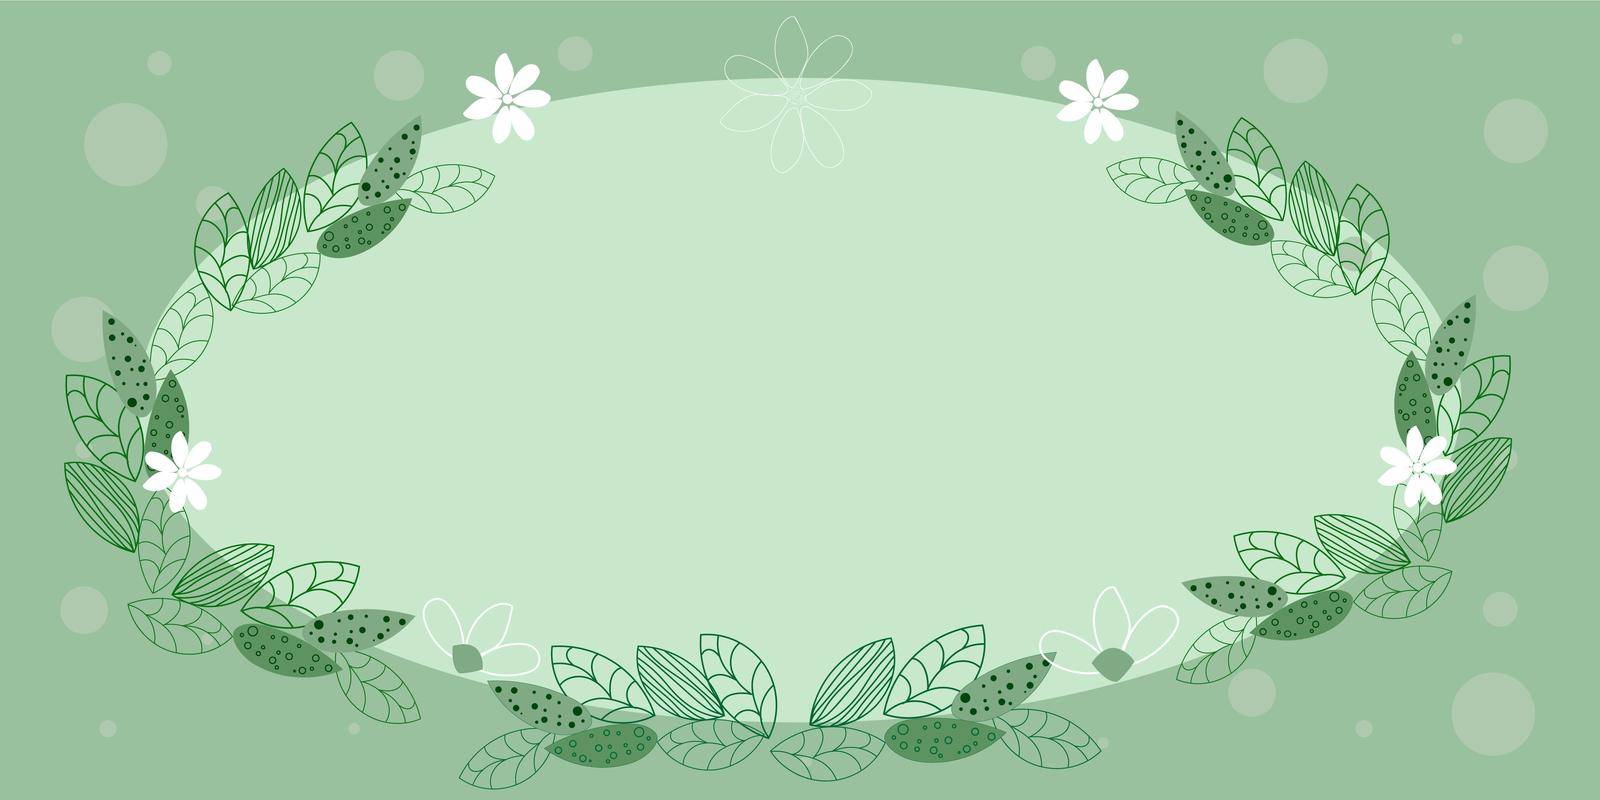 Blank Frame Decorated With Abstract Modernized Forms Flowers And Foliage.